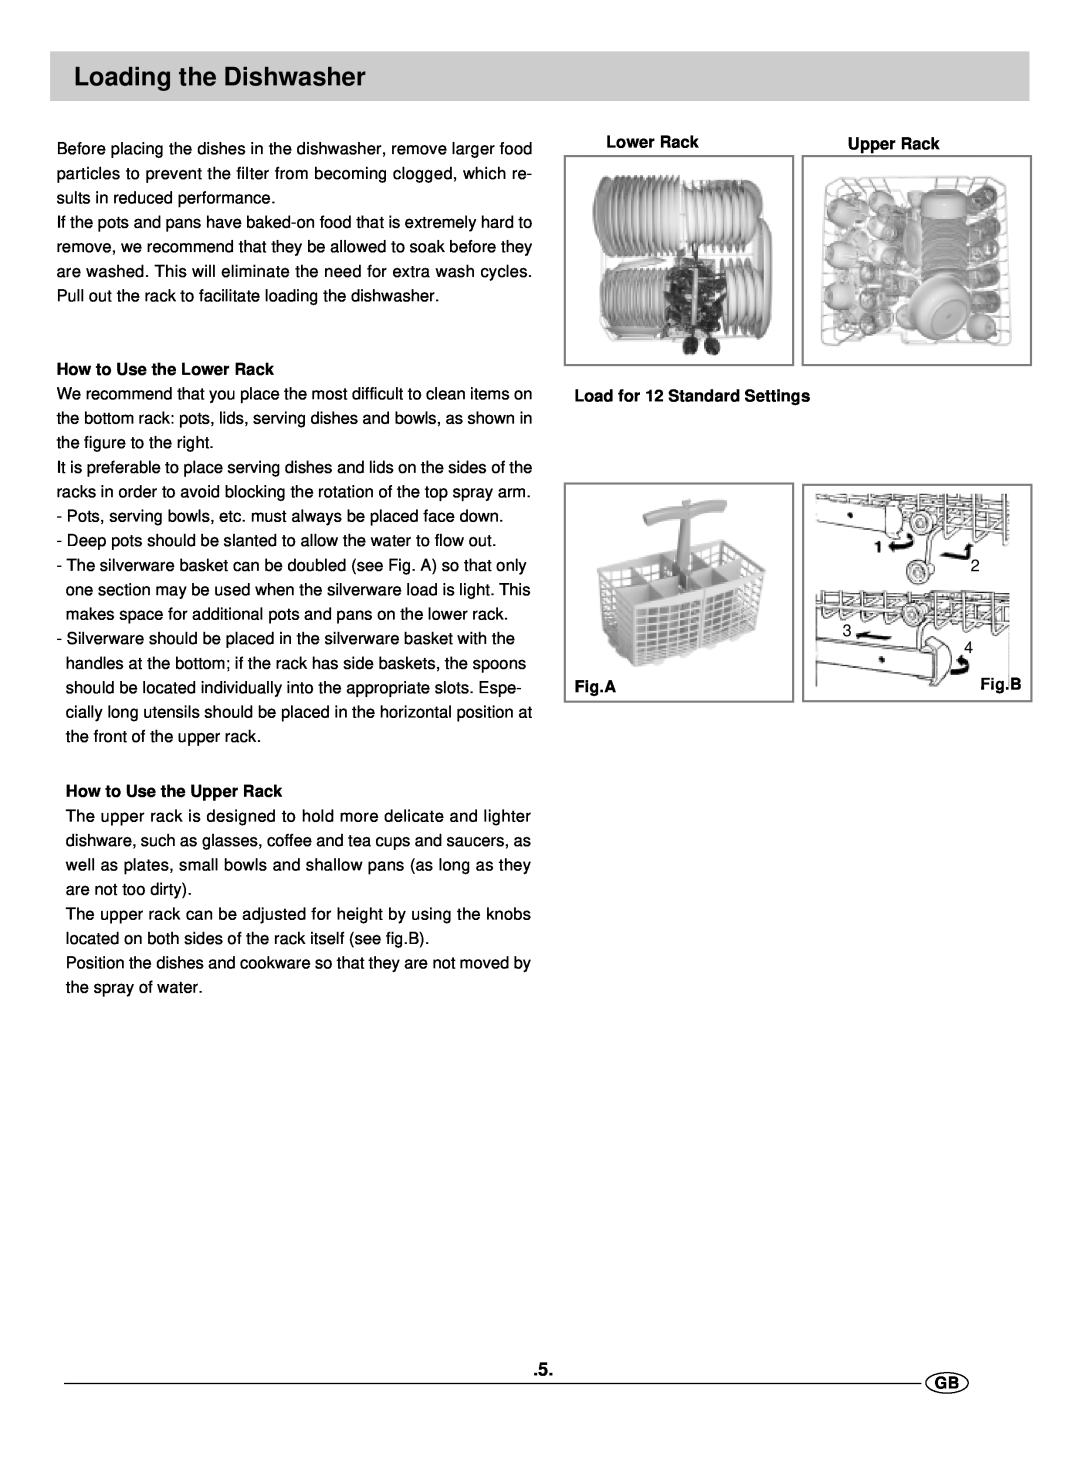 Haier DW12-EFM ME manual Loading the Dishwasher, How to Use the Lower Rack, How to Use the Upper Rack, Fig.A, Fig.B 